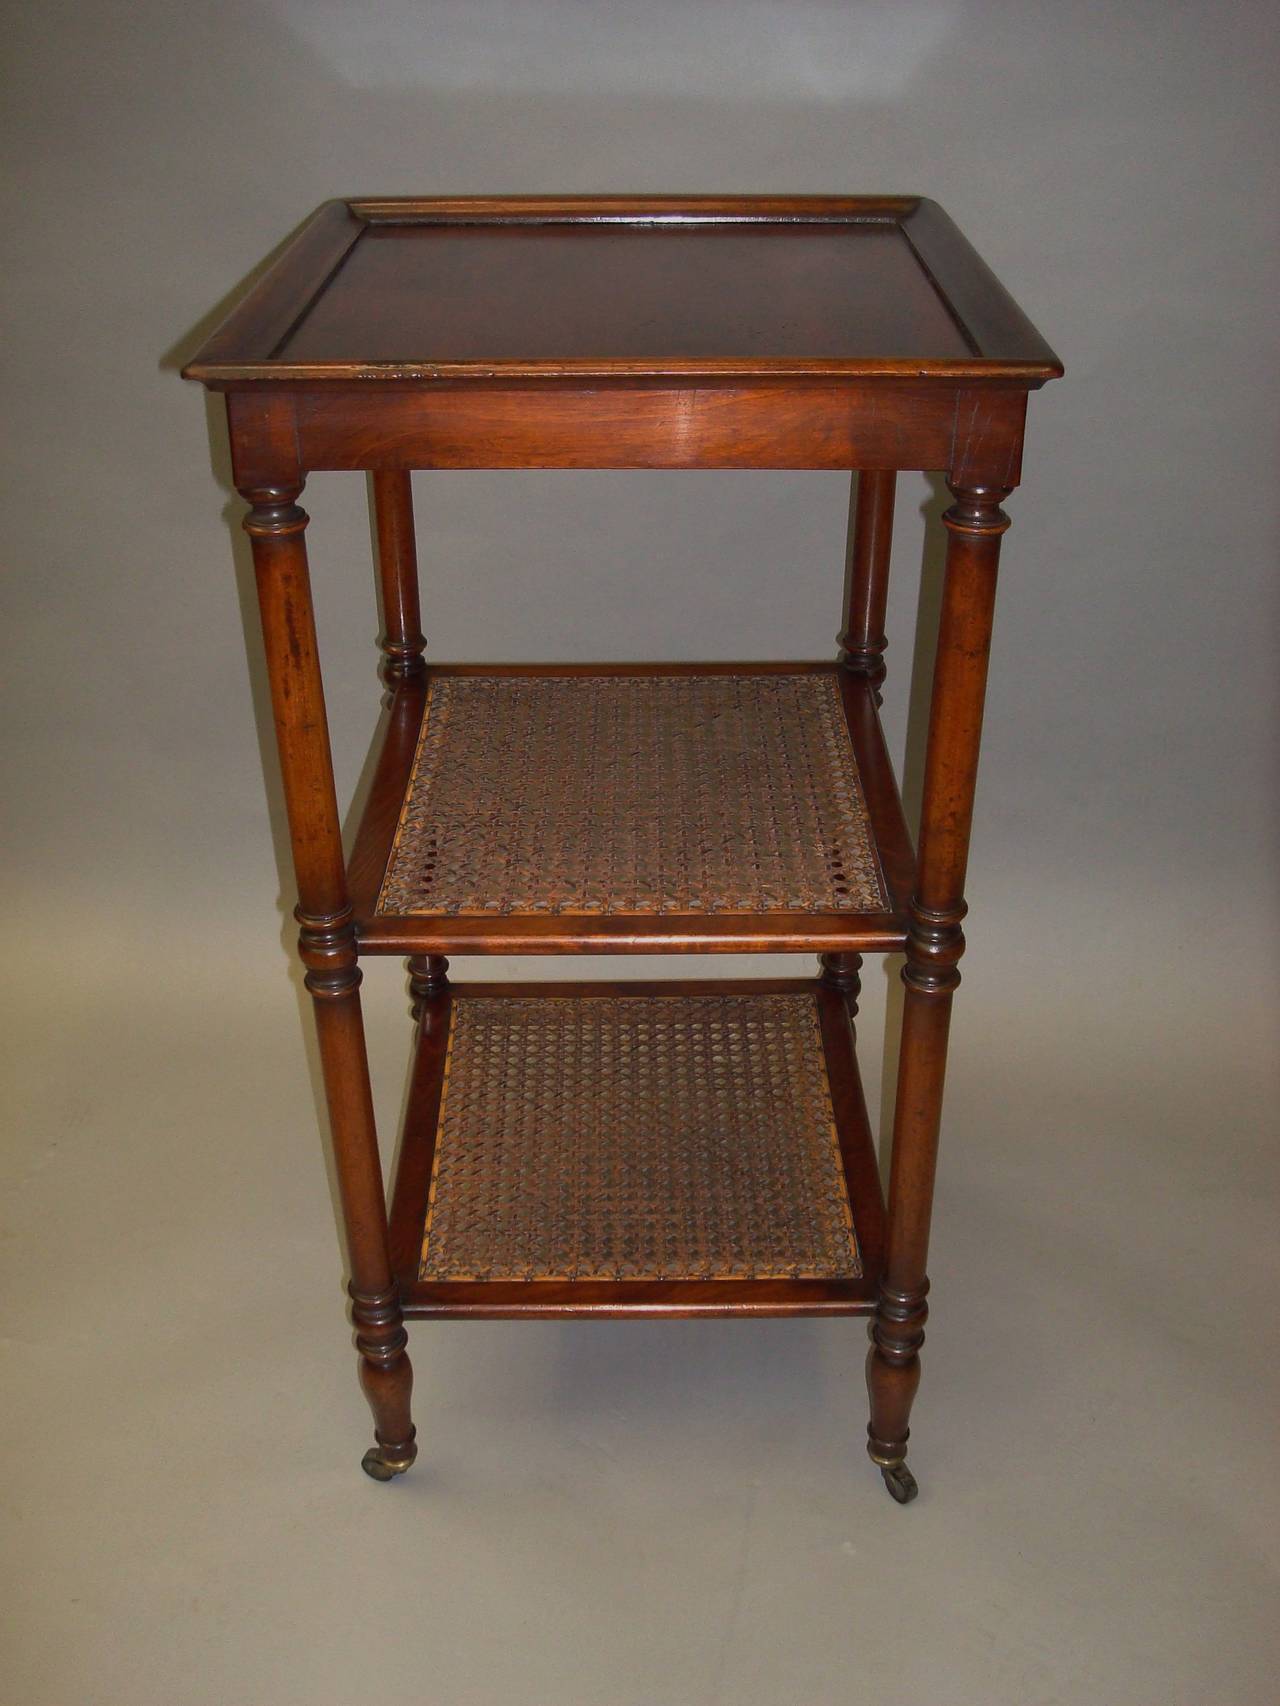 Regency mahogany three tier étagère, the figured mahogany top with a shaped raised moulding to the sides, on slender turned supports, united by two lower tiers with cane inset panels, raised on turned tapering legs with original brass castors.